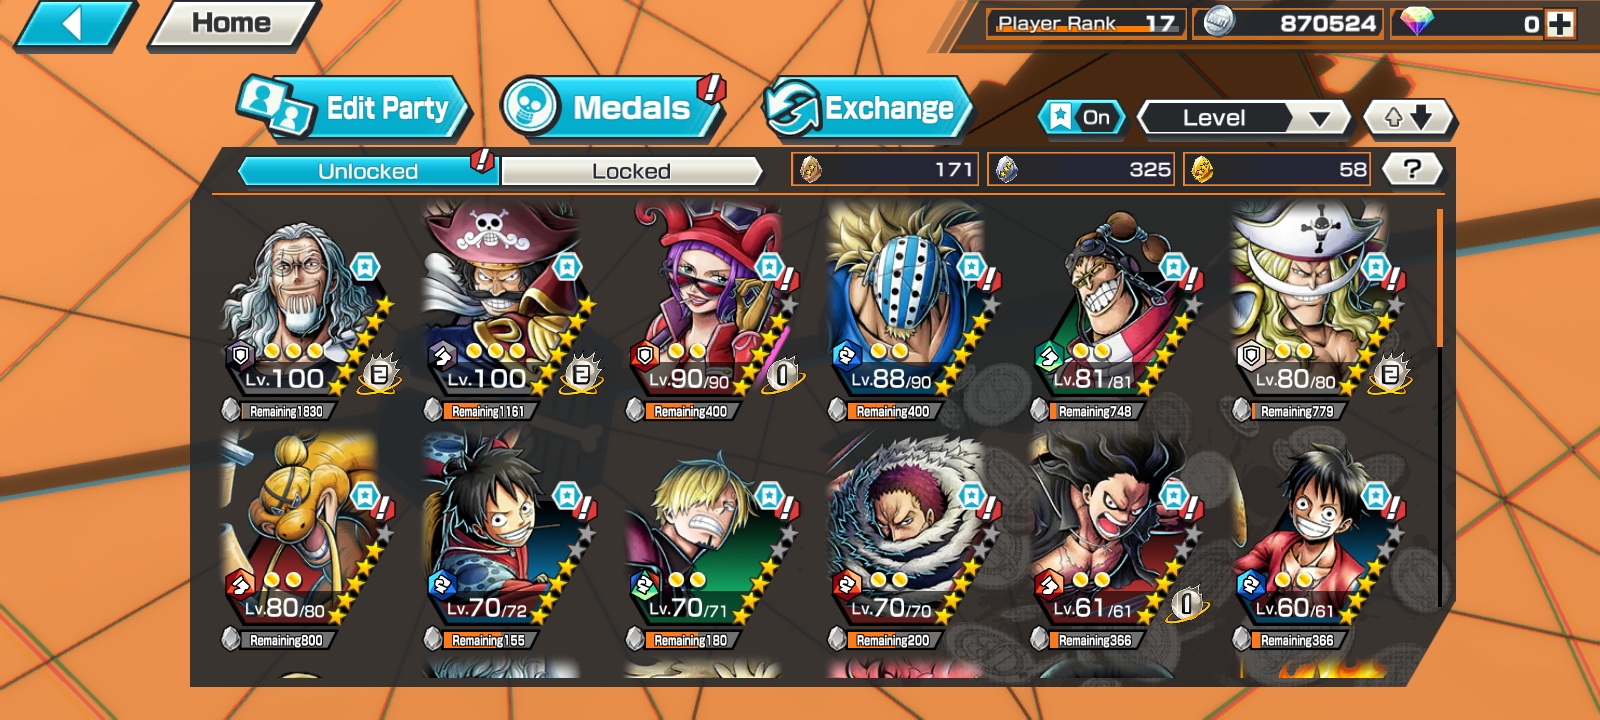 IOS+Android-2 Ex(Roger New max+Whitebeard)-Good Medal-SP 123%-Good BF(Queen+Killer+Rayleigh+Sanji)-HP805